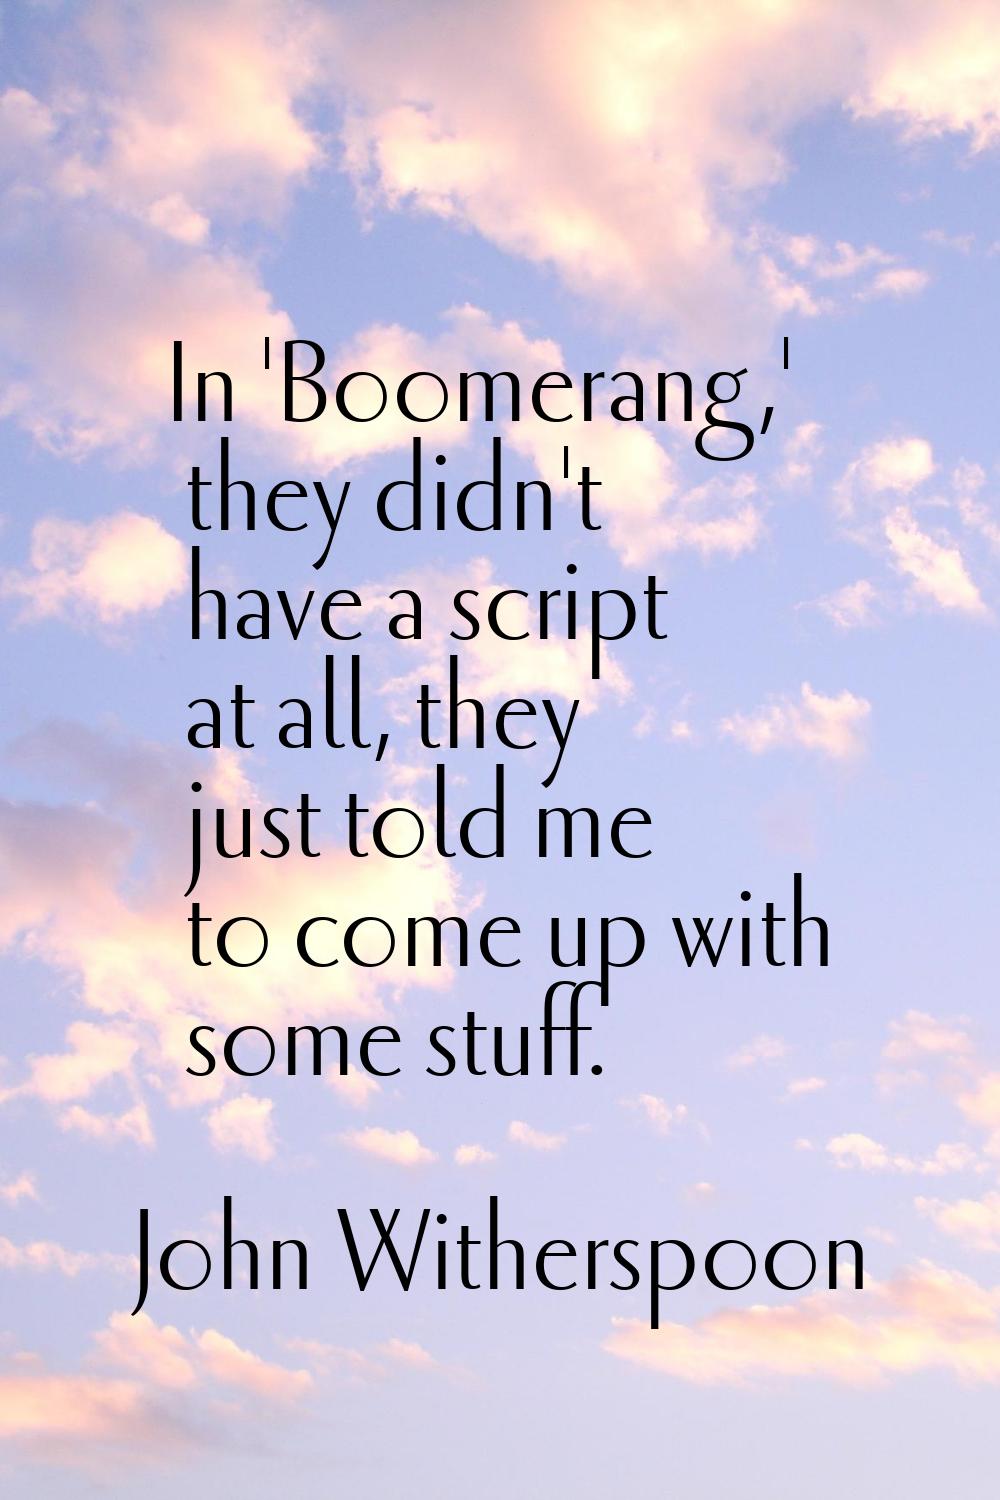 In 'Boomerang,' they didn't have a script at all, they just told me to come up with some stuff.